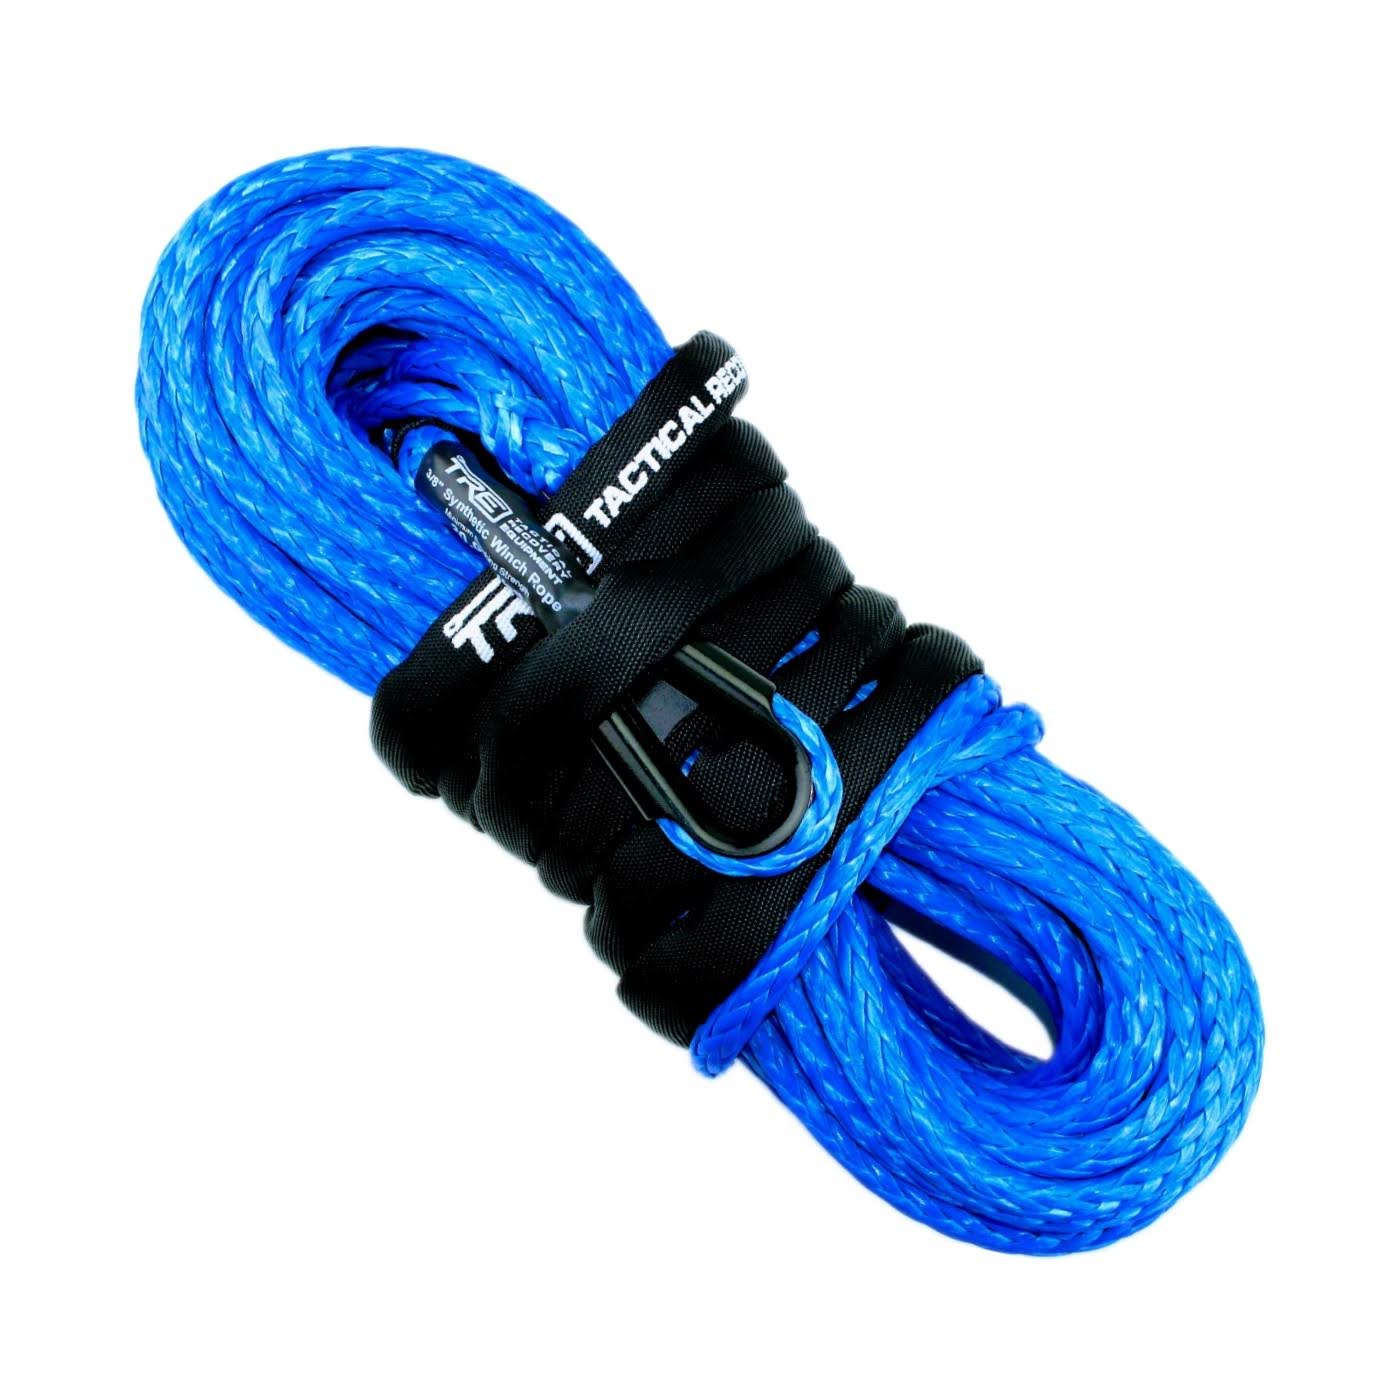 3/8 Synthetic Winch Rope - 20,000 lb. Breaking Strength